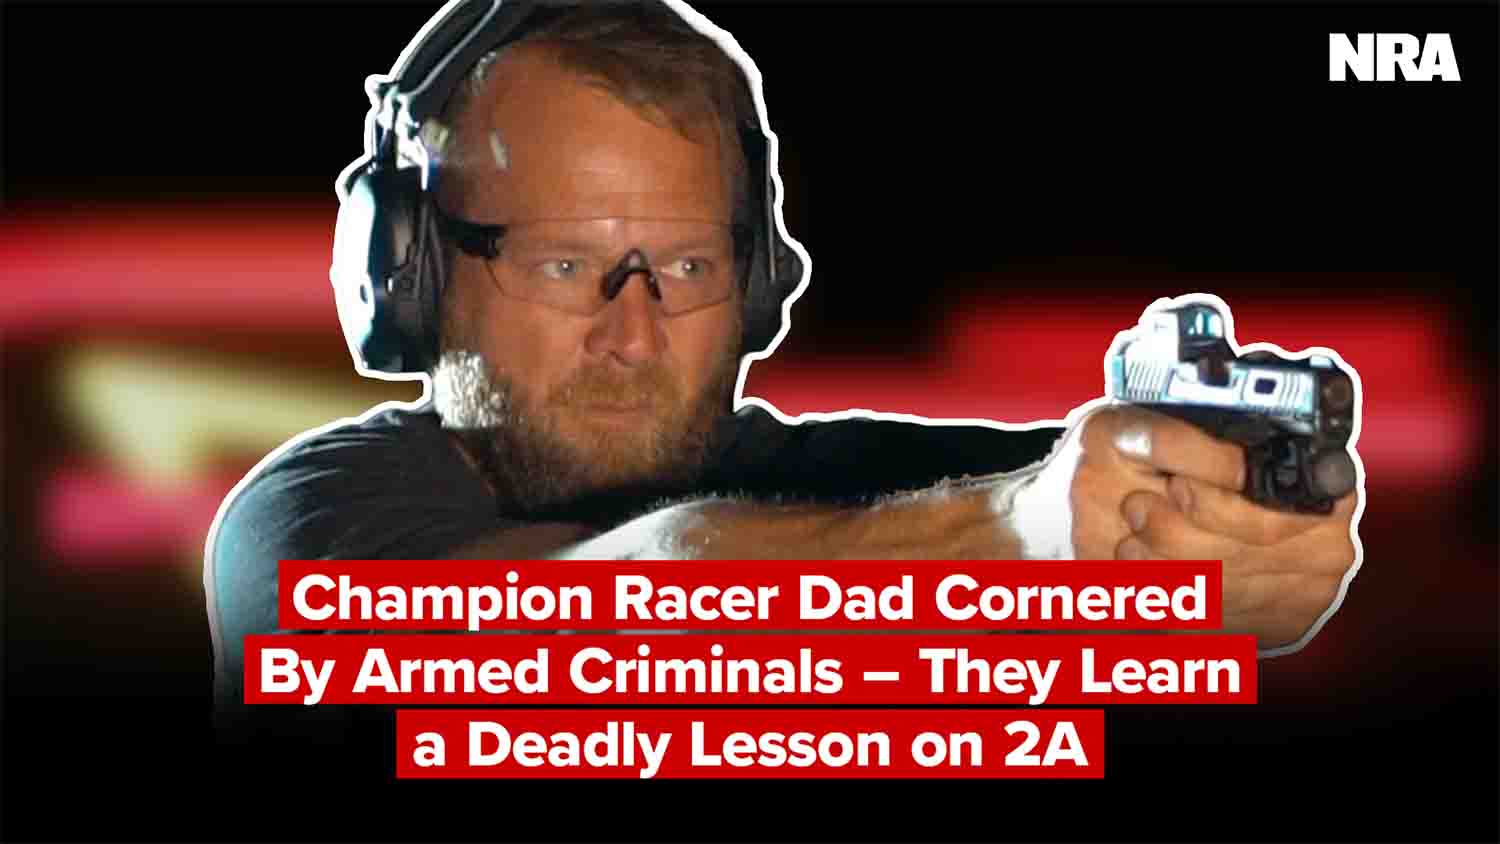 BJ Baldwin: Champion Racer Dad Cornered By Armed Criminals – They Learn a Deadly Lesson on 2A